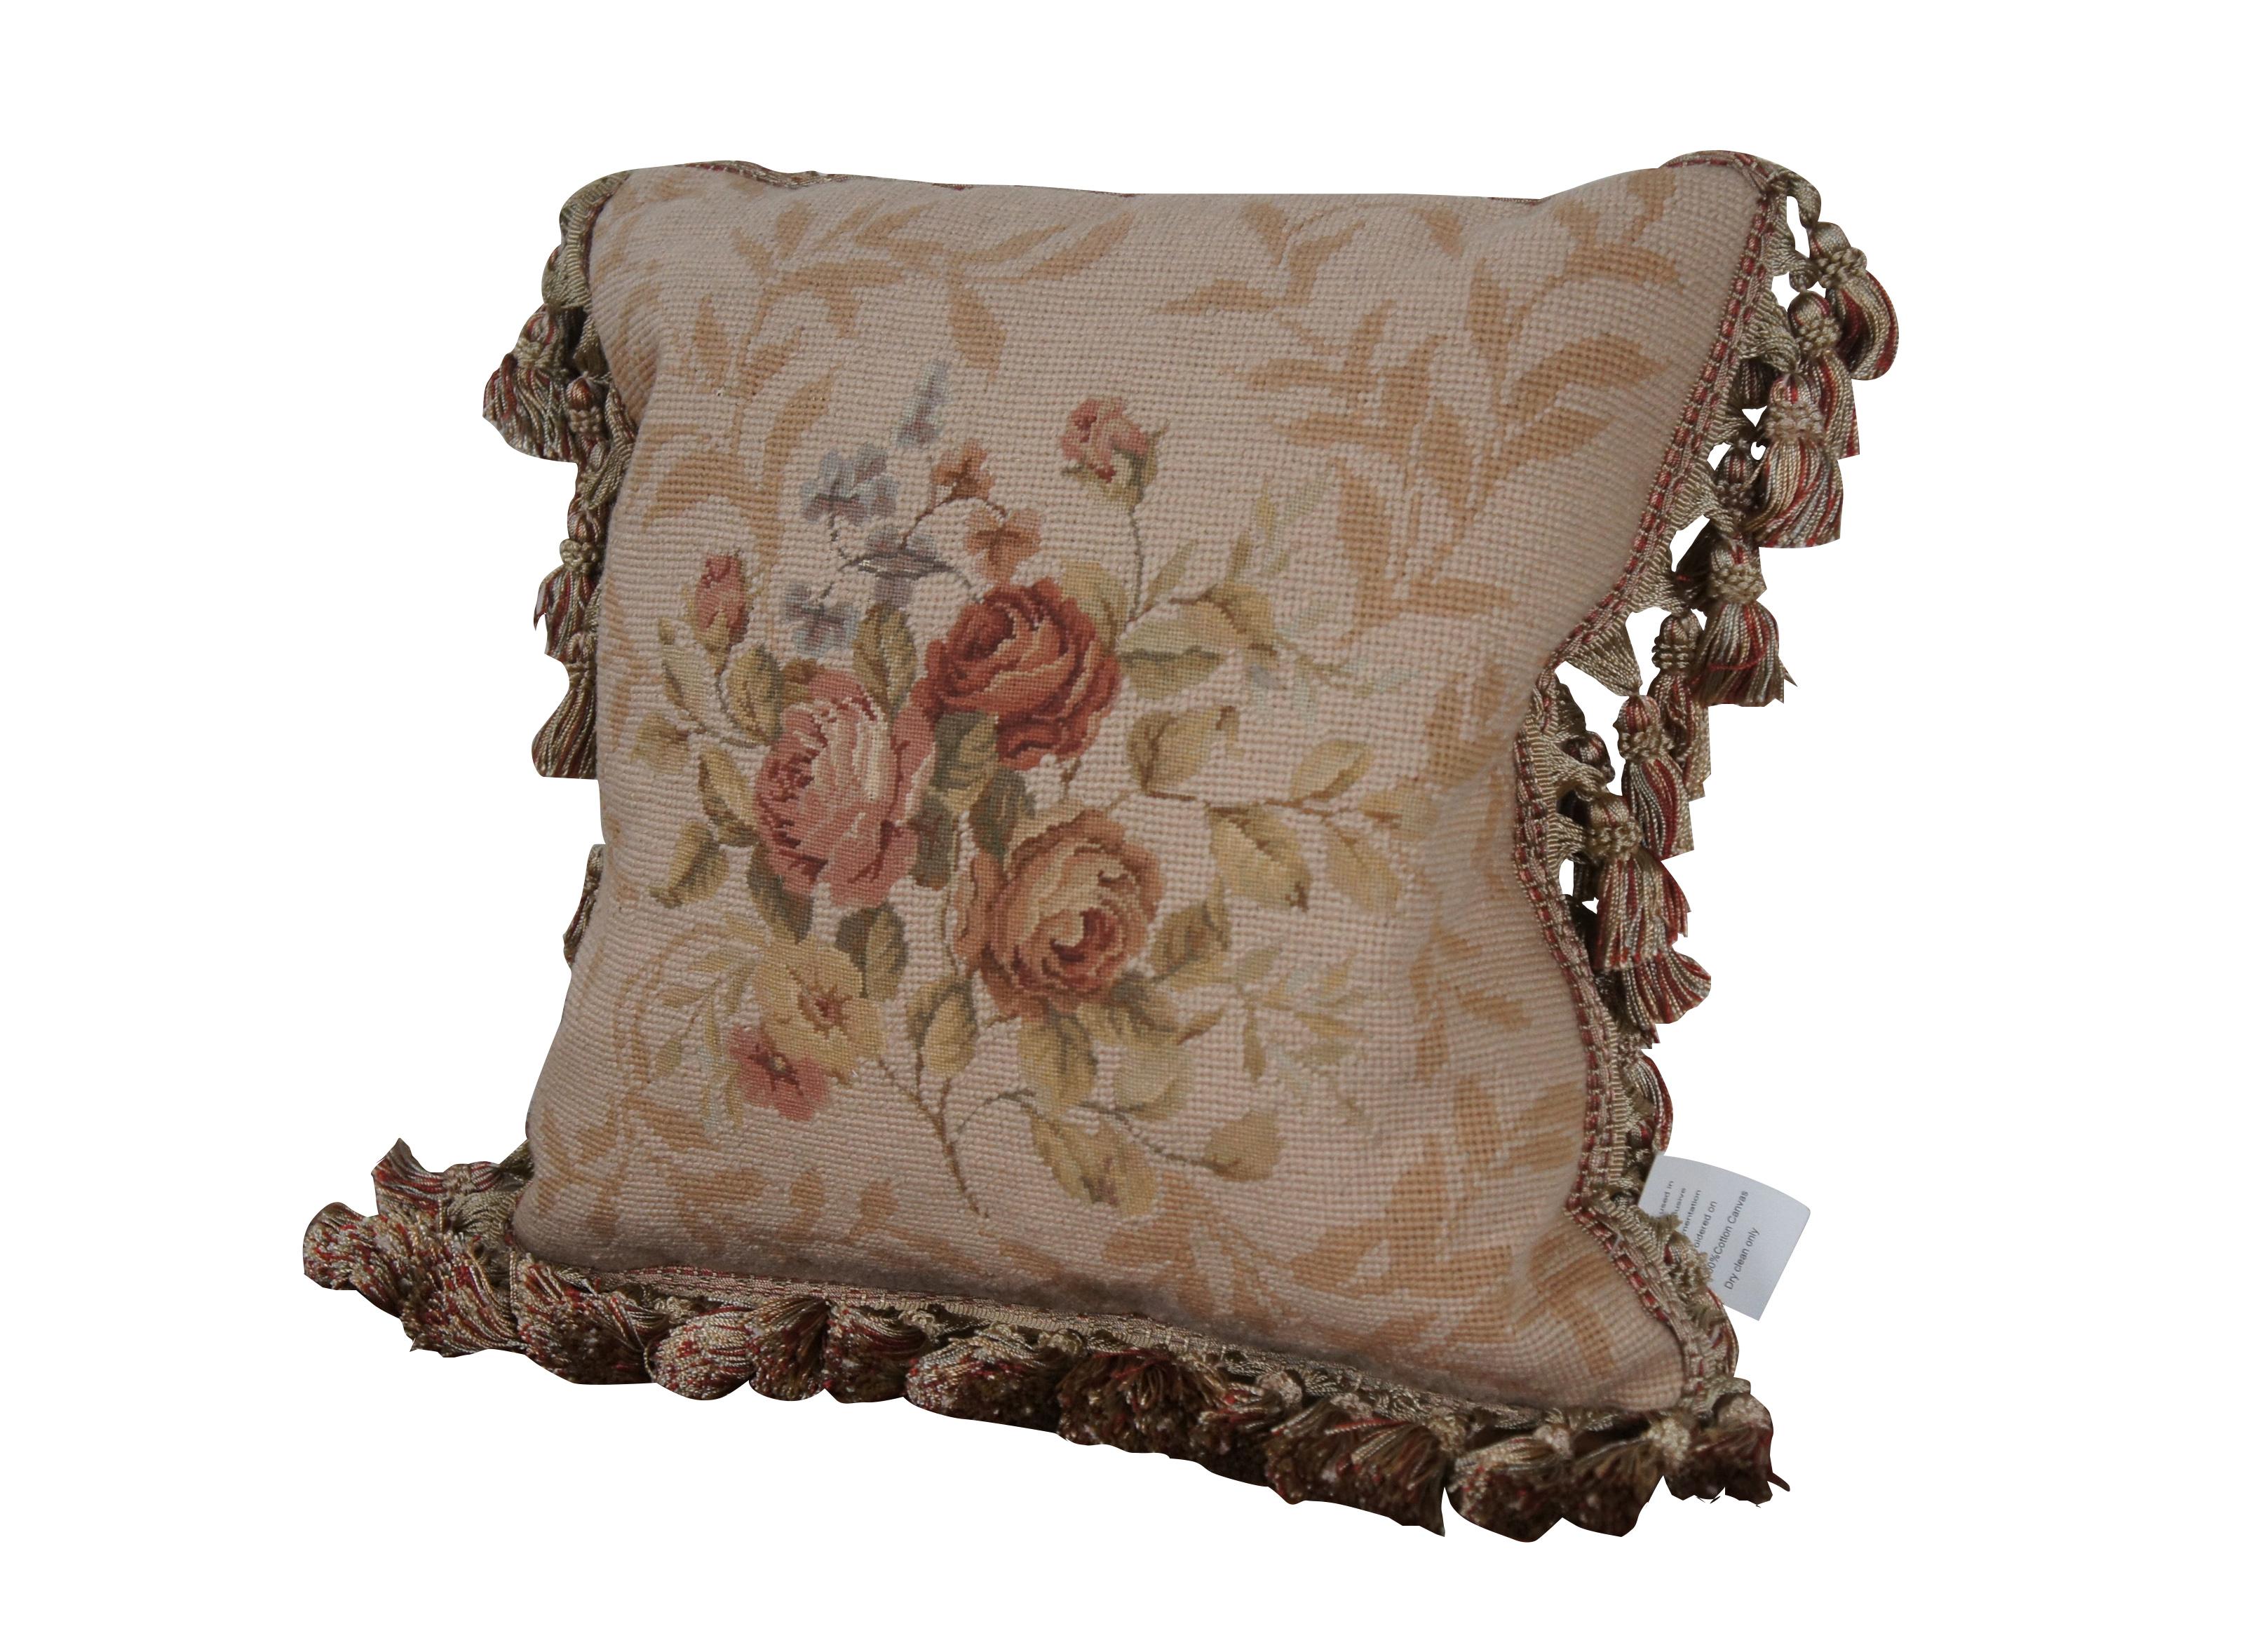 2 Available - 20th century square needlepoint throw pillow, hand embroidered in wool with a bouquet of pink, rust, yellow, and blue roses / flowers on a backdrop of beige leaves. Beige and red tassel trim. Beige velour back with zipper closure. Down